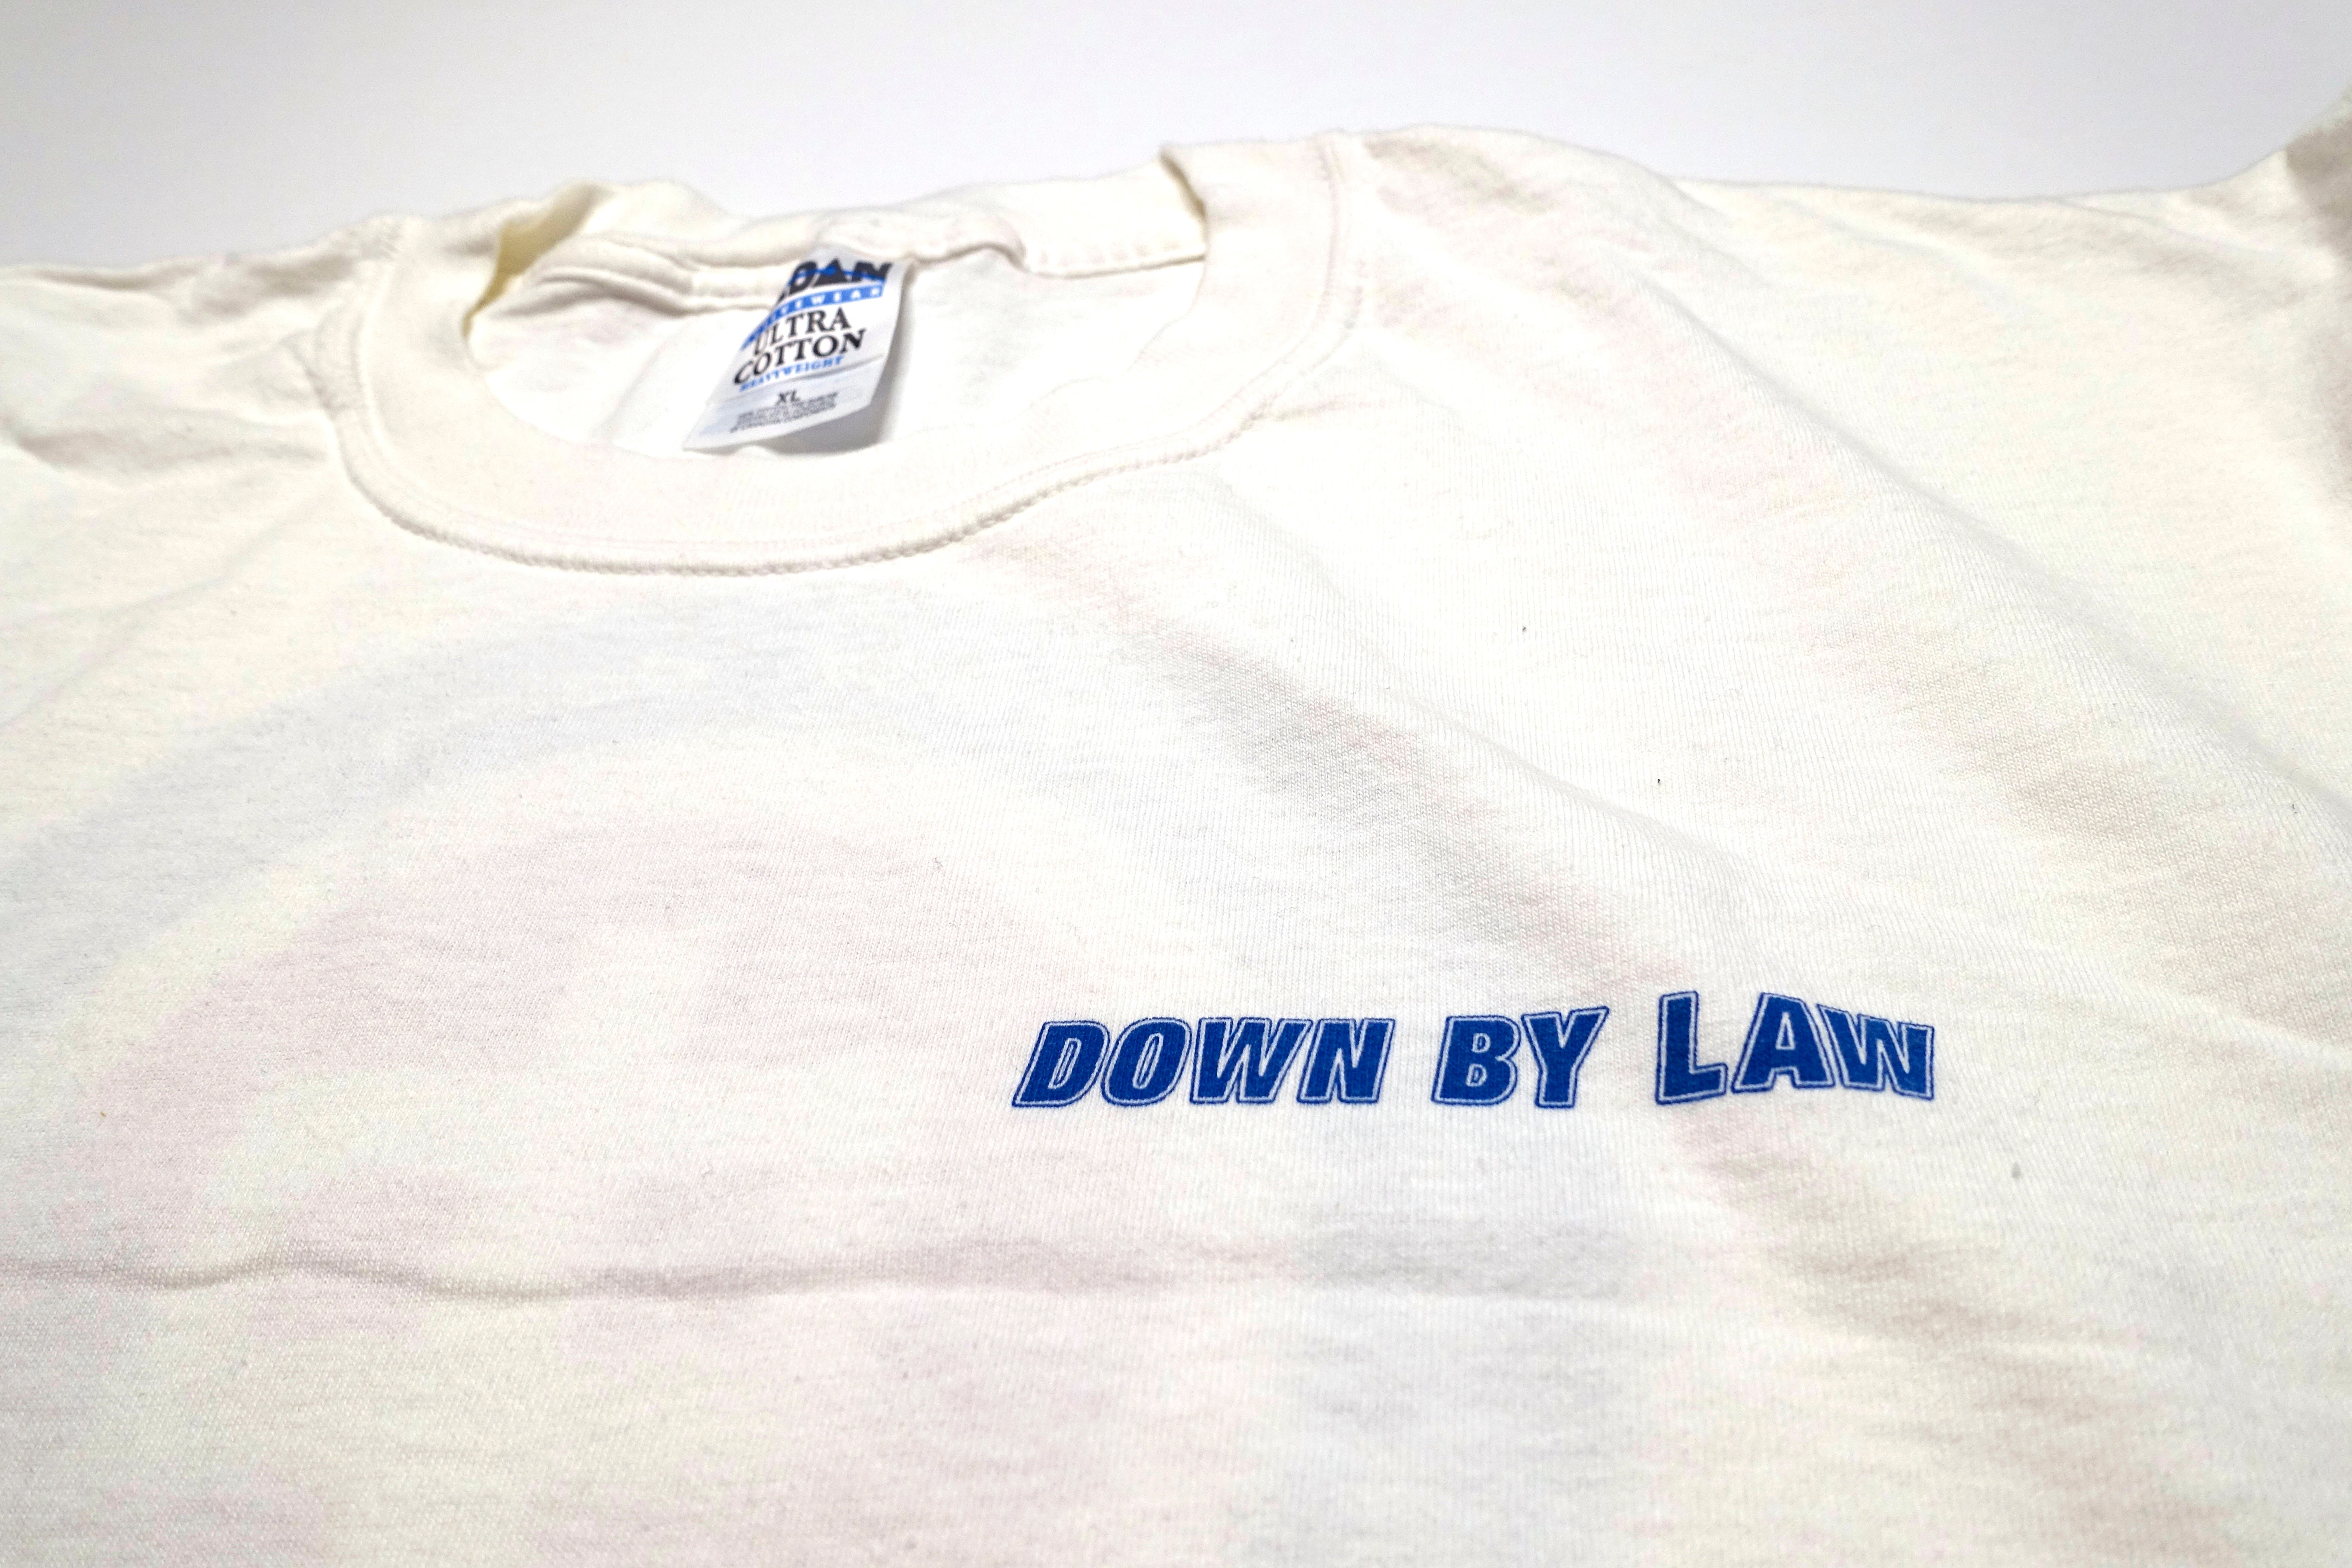 Down By Law - Racing Stripes Long Sleeve Tour Shirt Size XL